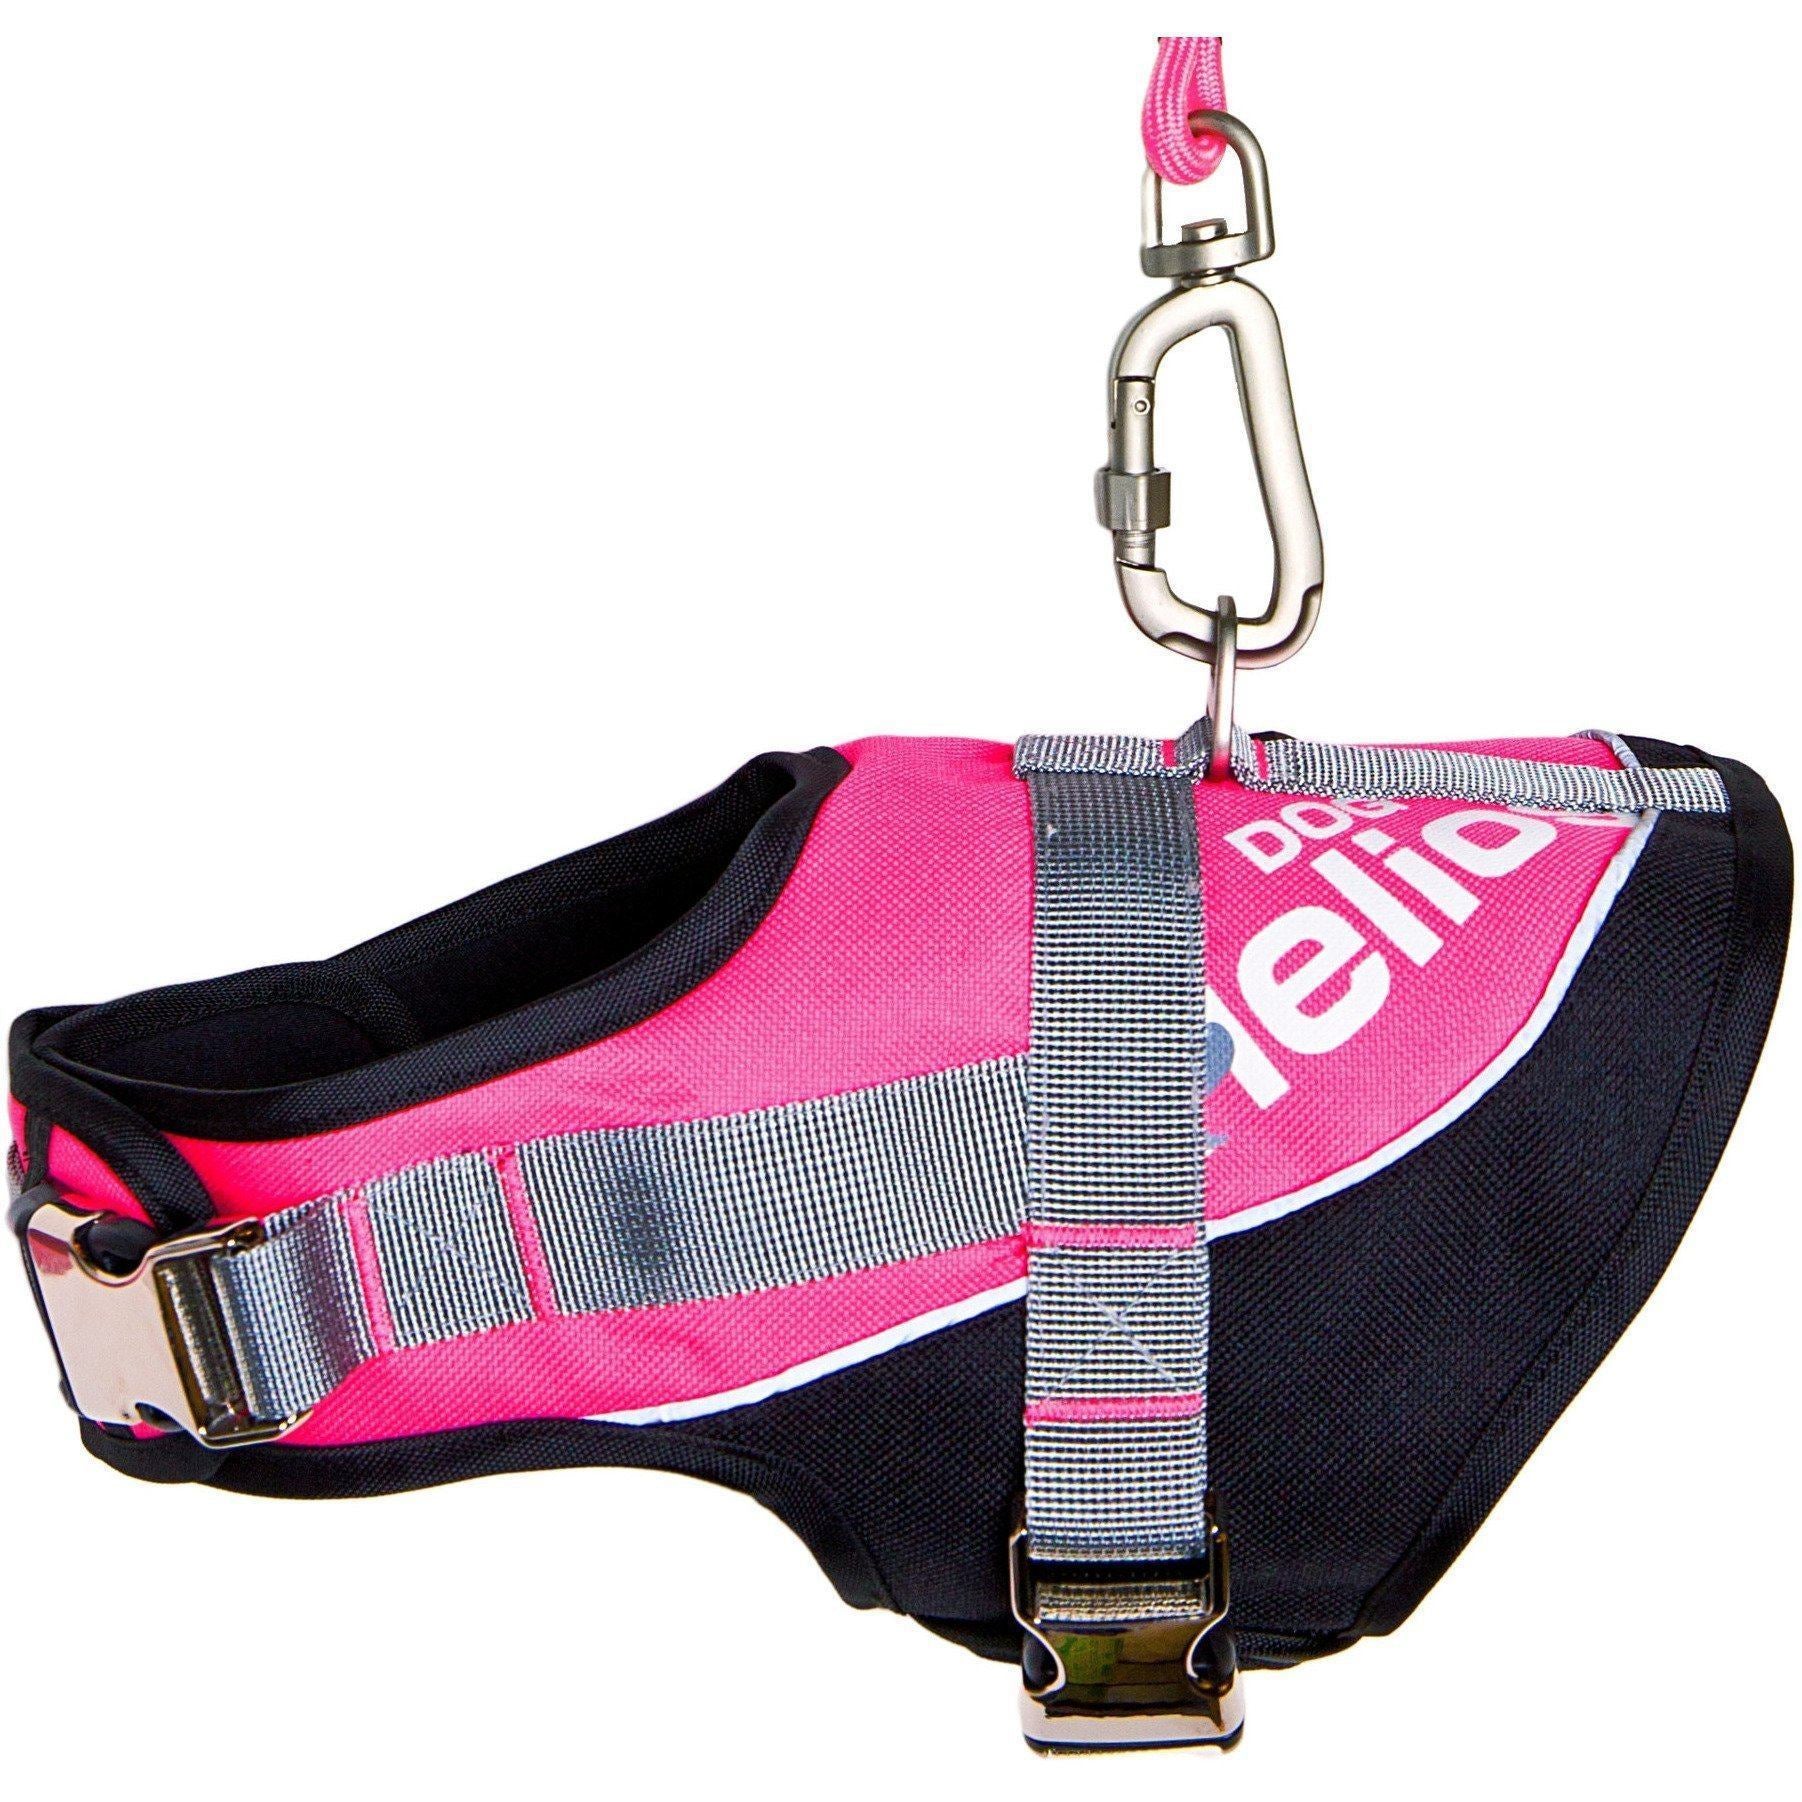 Dog Helios ® 'Bark-Mudder' 2-in-1 Reflective and Adjustable Sporty Dog Harness and Leash  